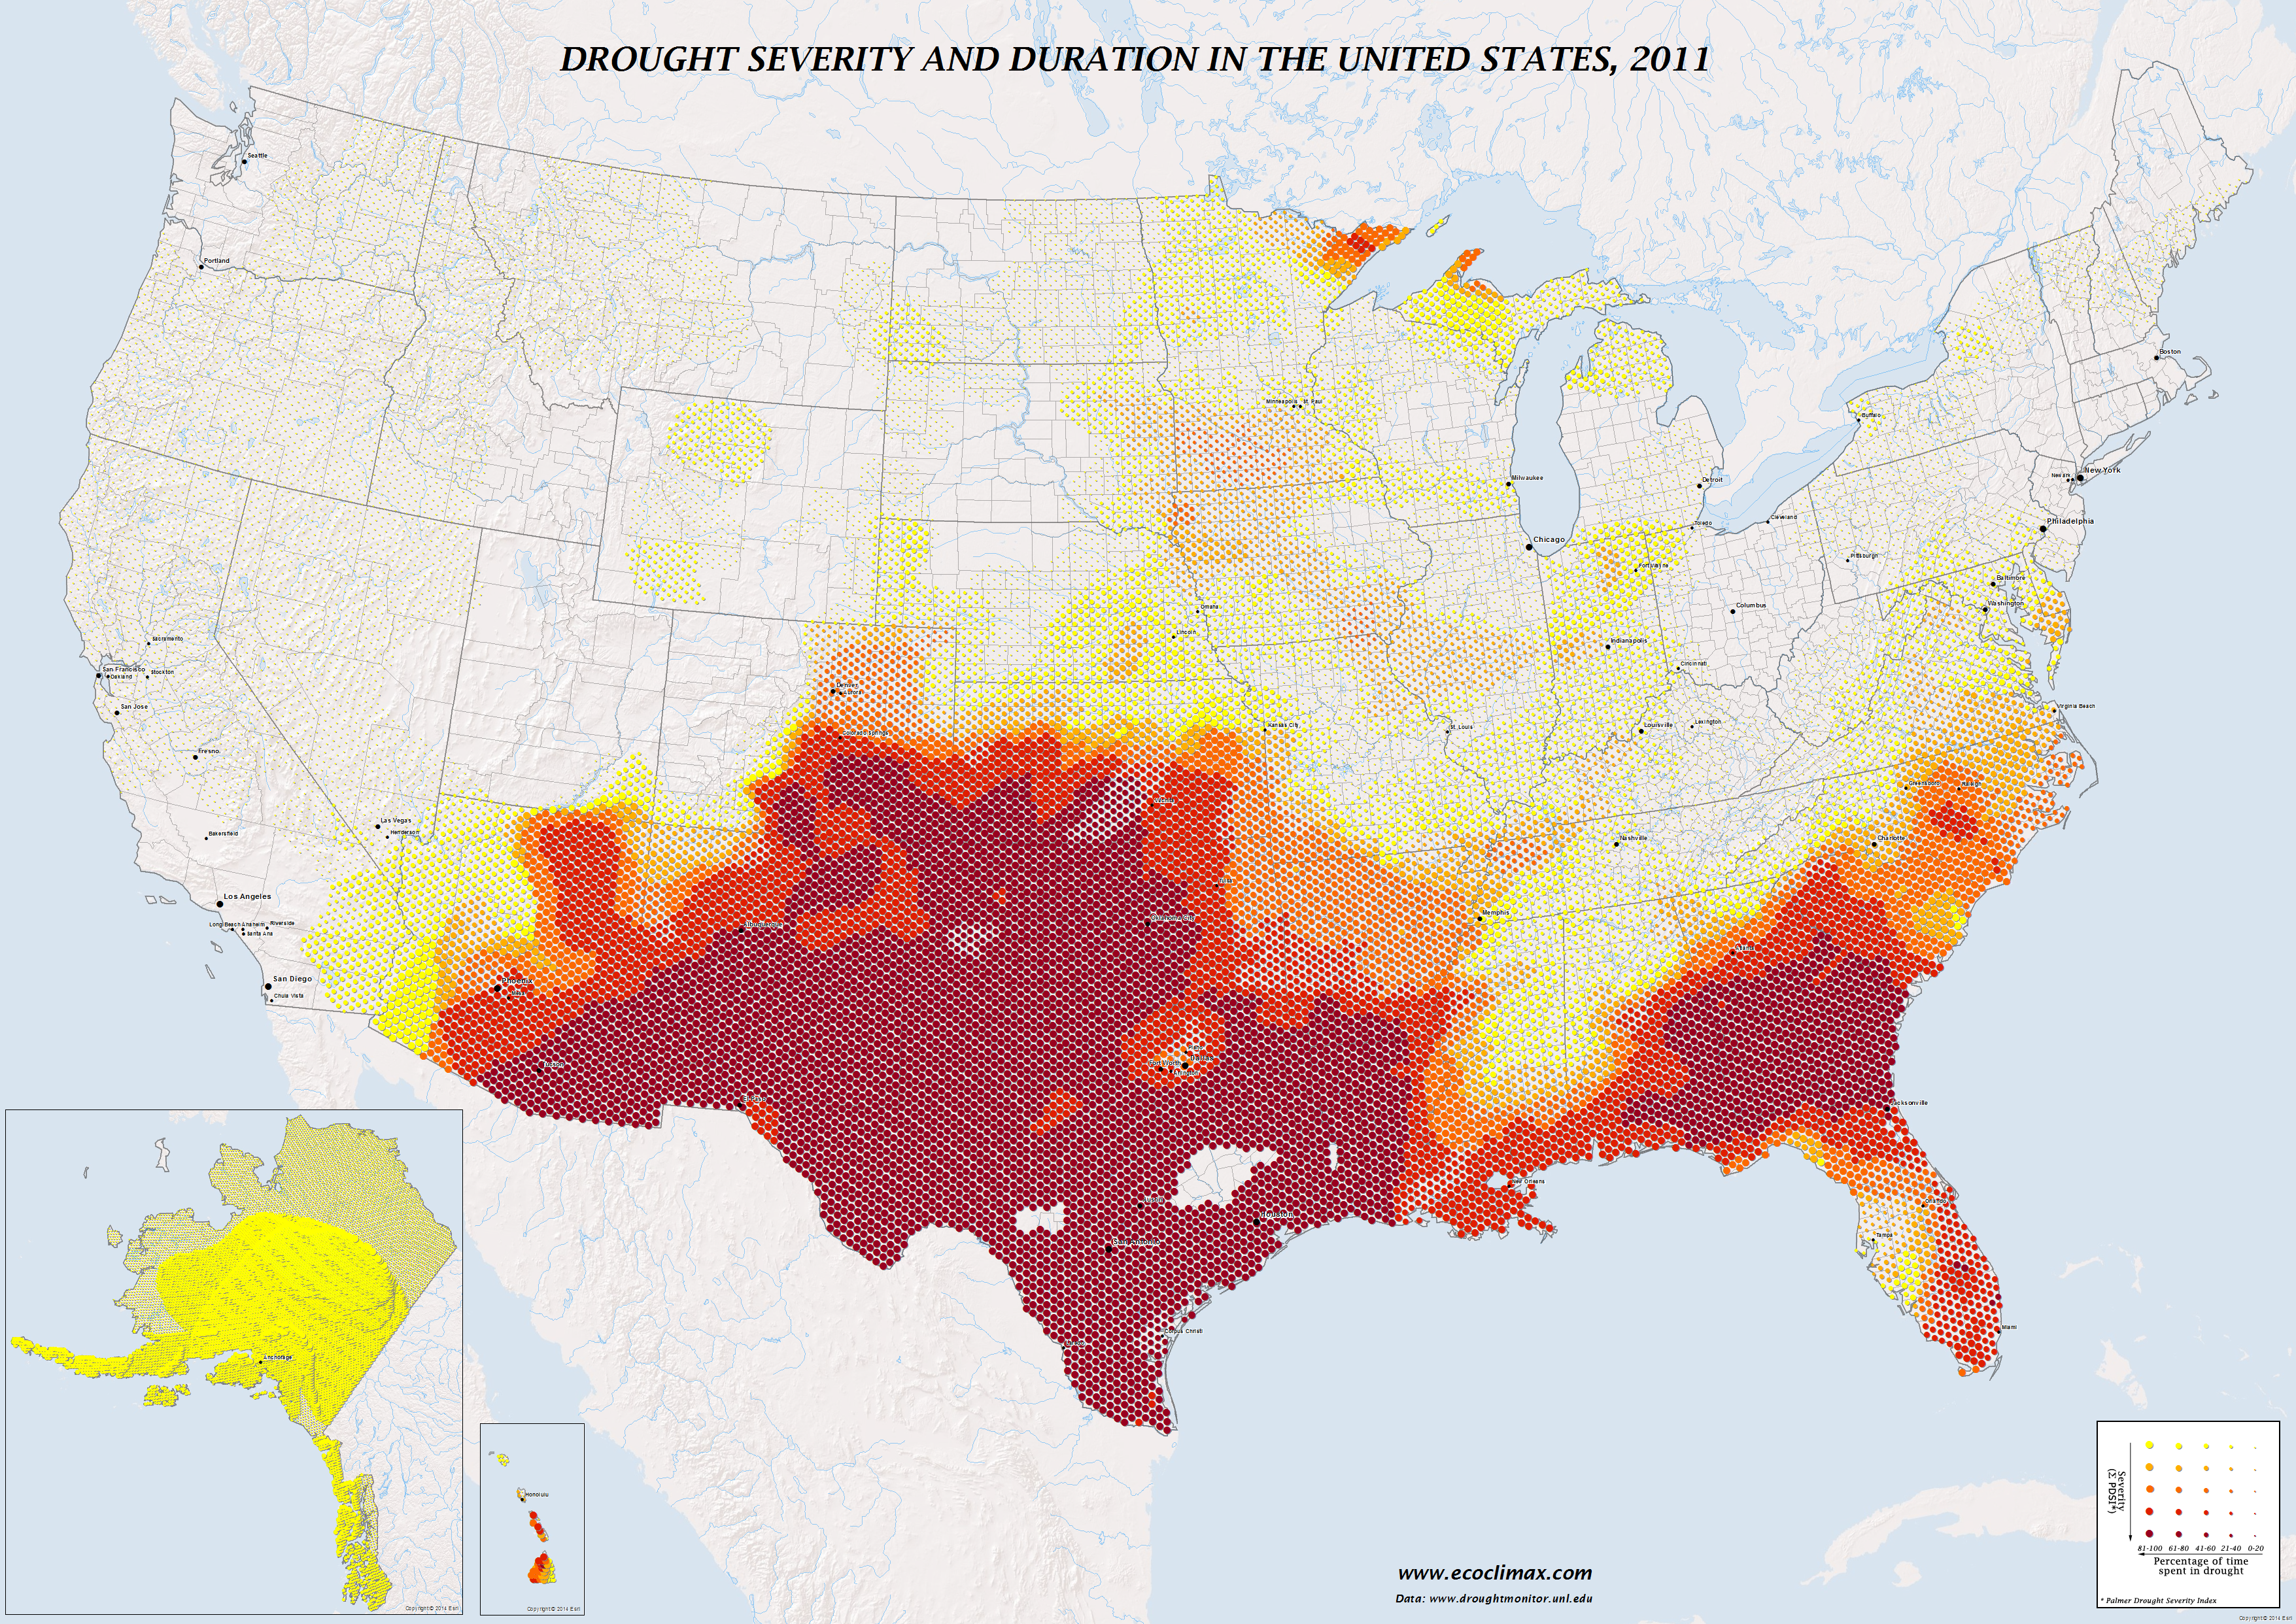 Drought severity & duration in the U.S, 2011